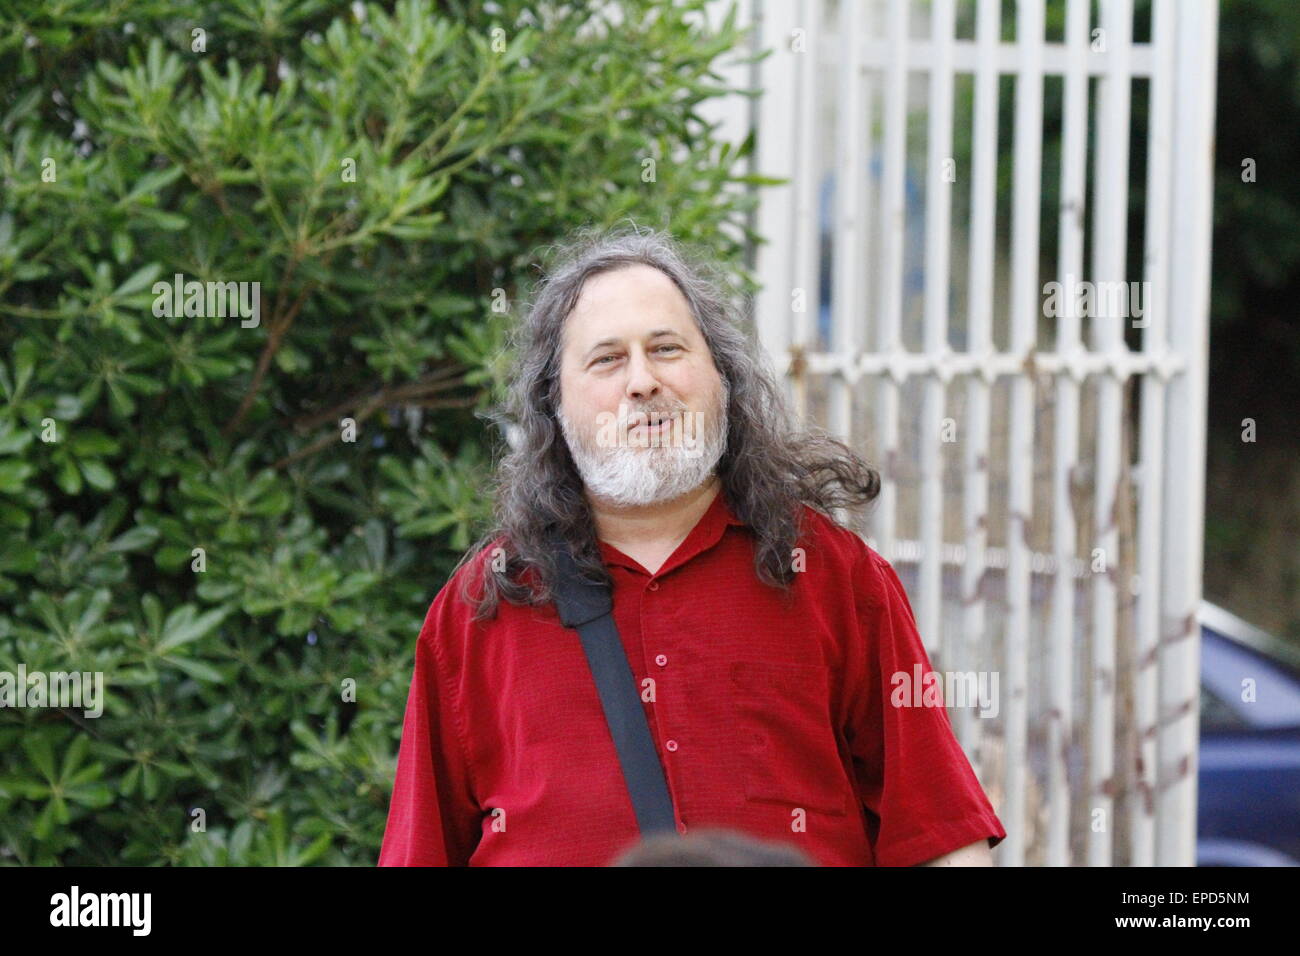 Athens, Greece. 16th May, 2015. Richard Stallman speaks at the Commons Fest 2015. Richard Stallman, founder of the GNU Project a free software foundation, spoke at Commons Fest 2015 in Athens about free software and threads to freedom through technology. © Michael Debets/Pacific Press/Alamy Live News Stock Photo